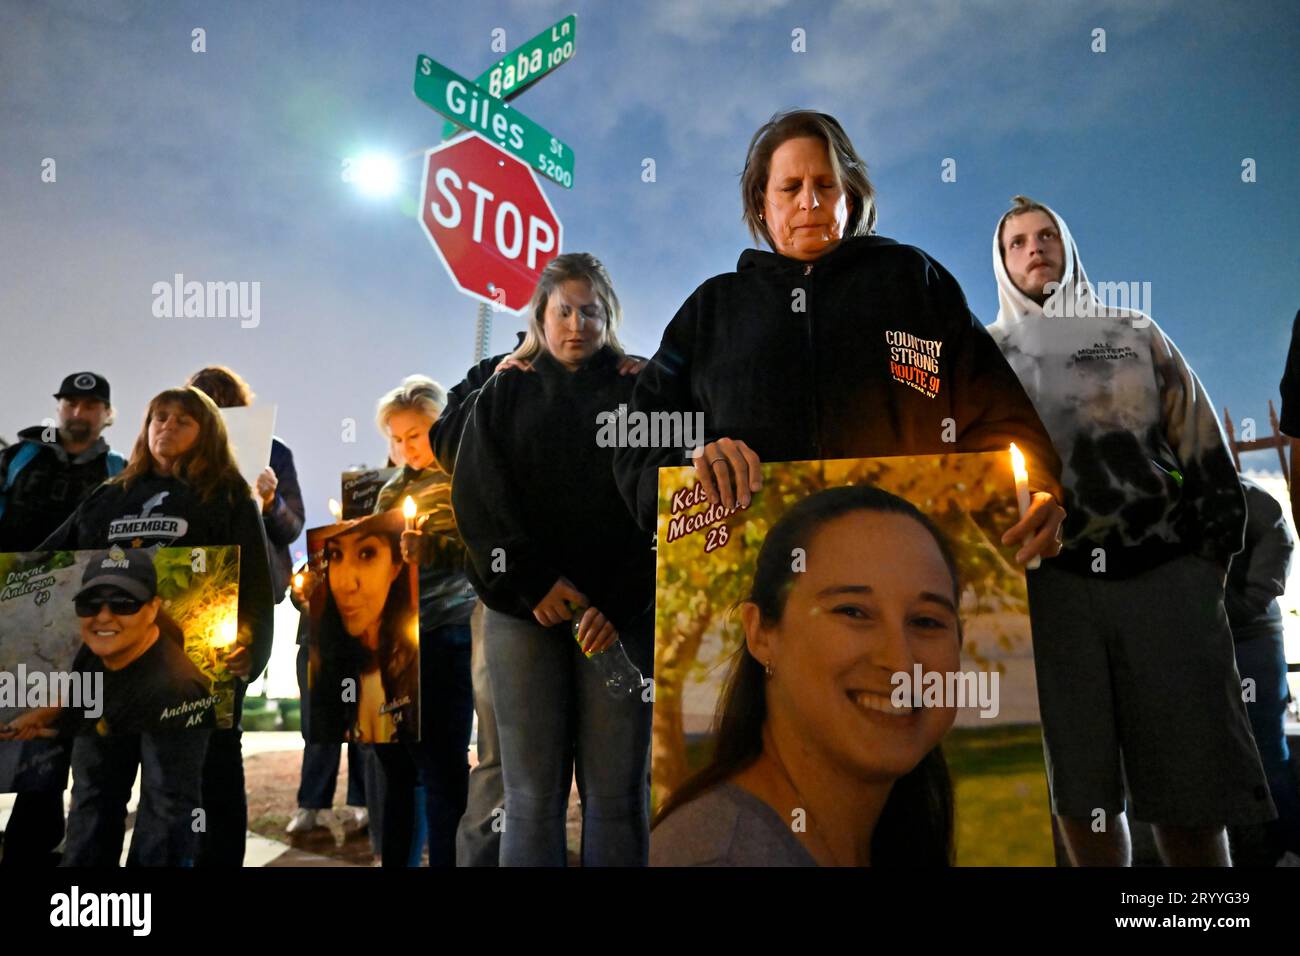 Las Vegas, Nevada, USA. 1st Oct, 2023. A moment of silence is had while people display photographs of victims from the 2017 Las Vegas mass shooting near the venue on October 1, 2023, in Las Vegas, Nevada. Approximately 150 people braved the unexpected rain and cold wind at the former Las Vegas Village to honor and remember the 58 people who were killed six years ago by a lone gunman during the Route 91 Harvest Music Festival from the 32nd story of Mandalay Bay Resort and Casino on October 1, 2017. Fifty-eight people died initially with two additional people dying later due to their injuries, Stock Photo